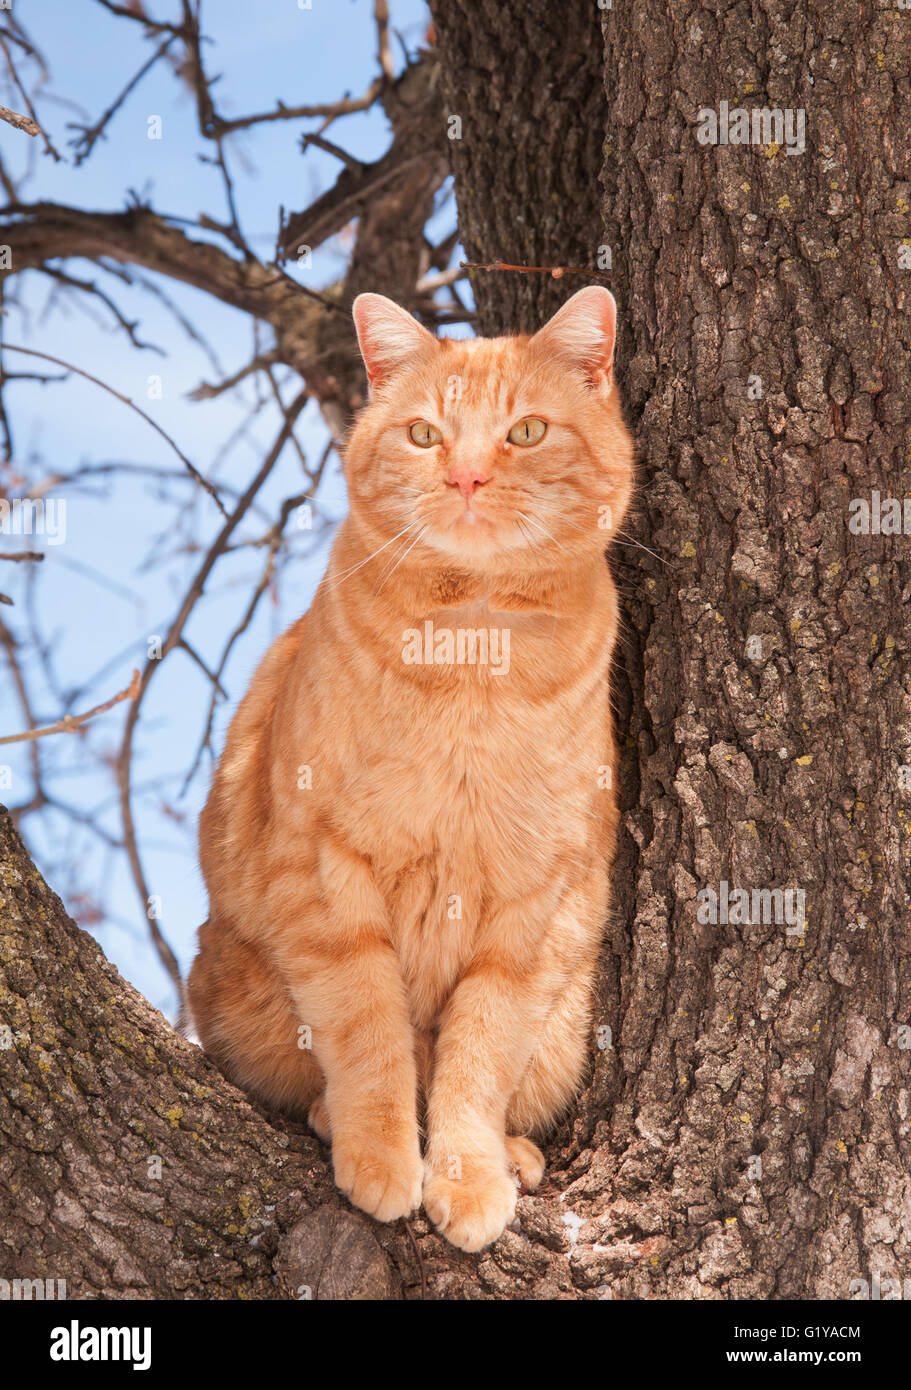 Beautiful ginger tabby cat sitting up in a tree Stock Photo